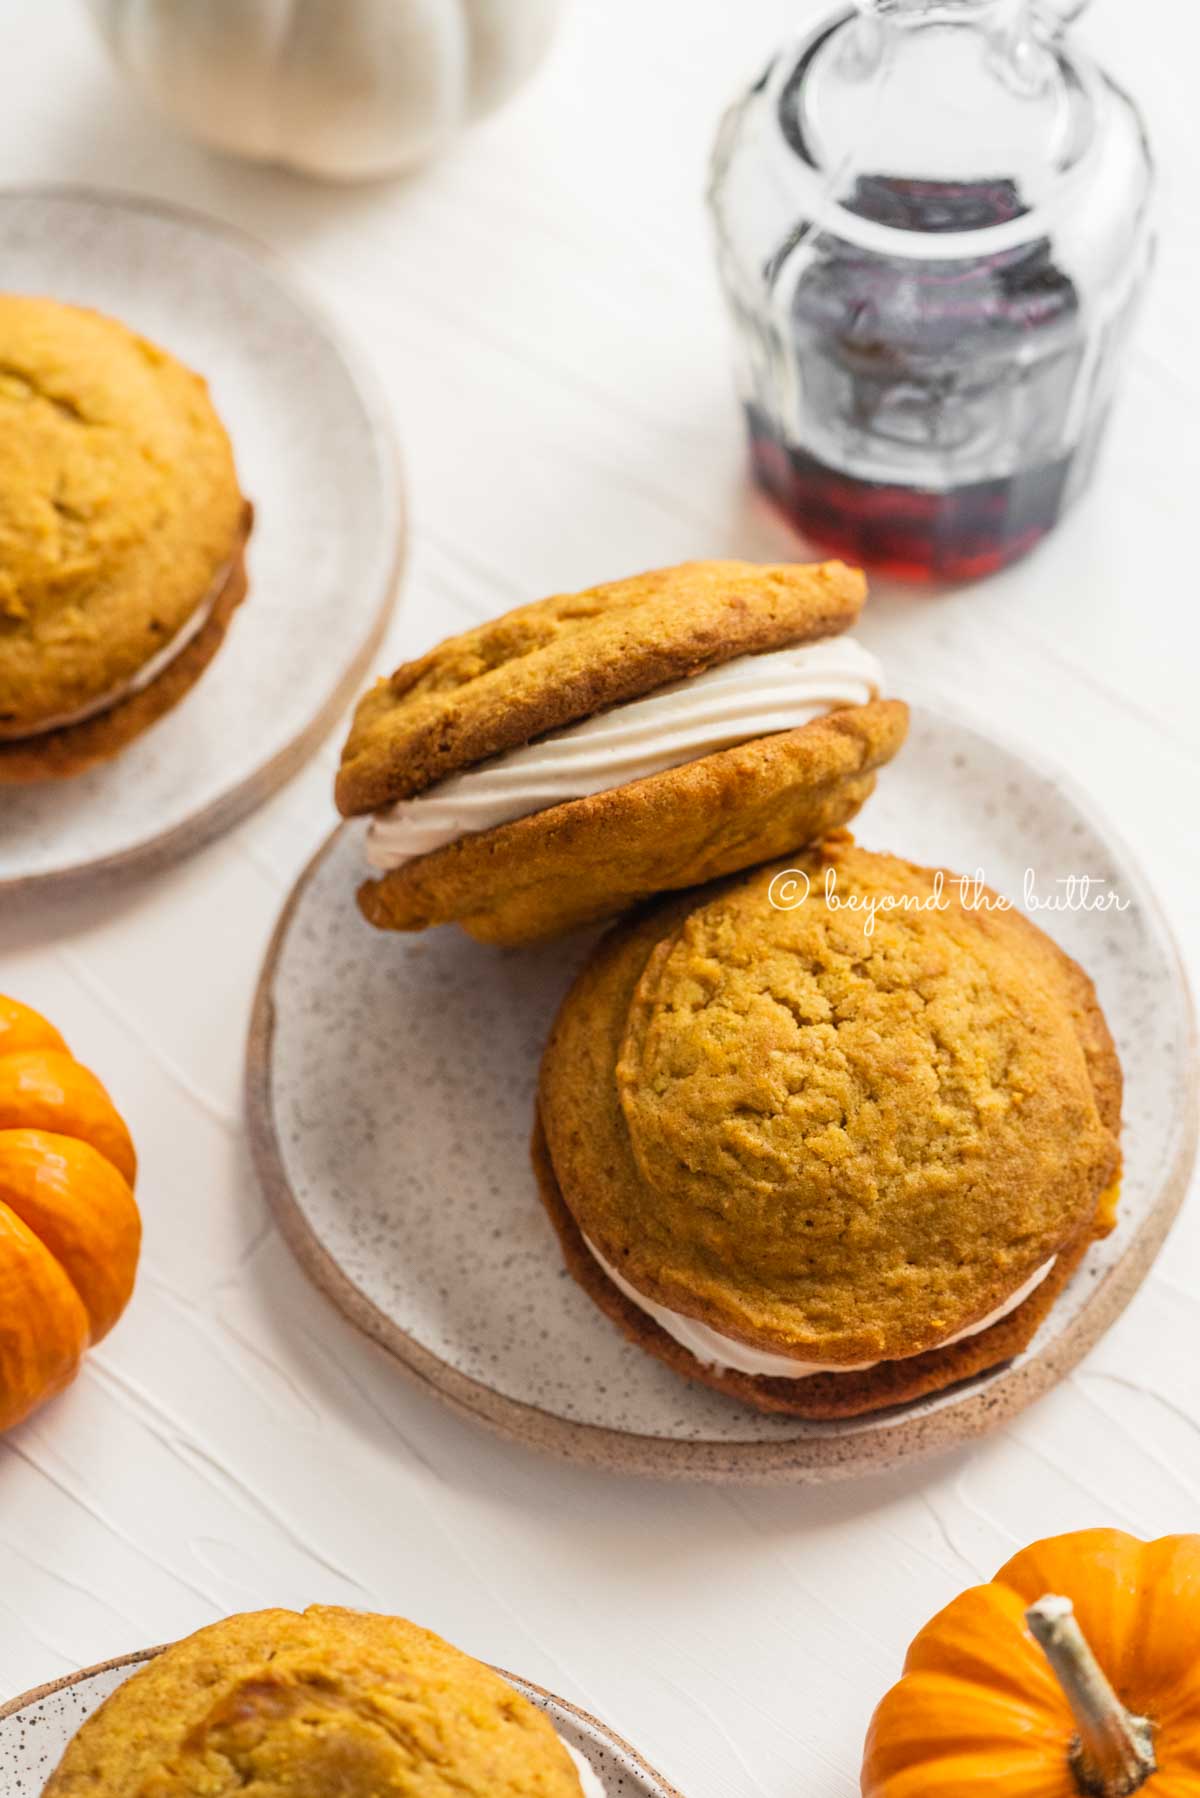 Pumpkin whoopie pies on speckled dessert plates with randomly placed mini pumpkins and a glass of maple syrup | All Images © Beyond the Butter™